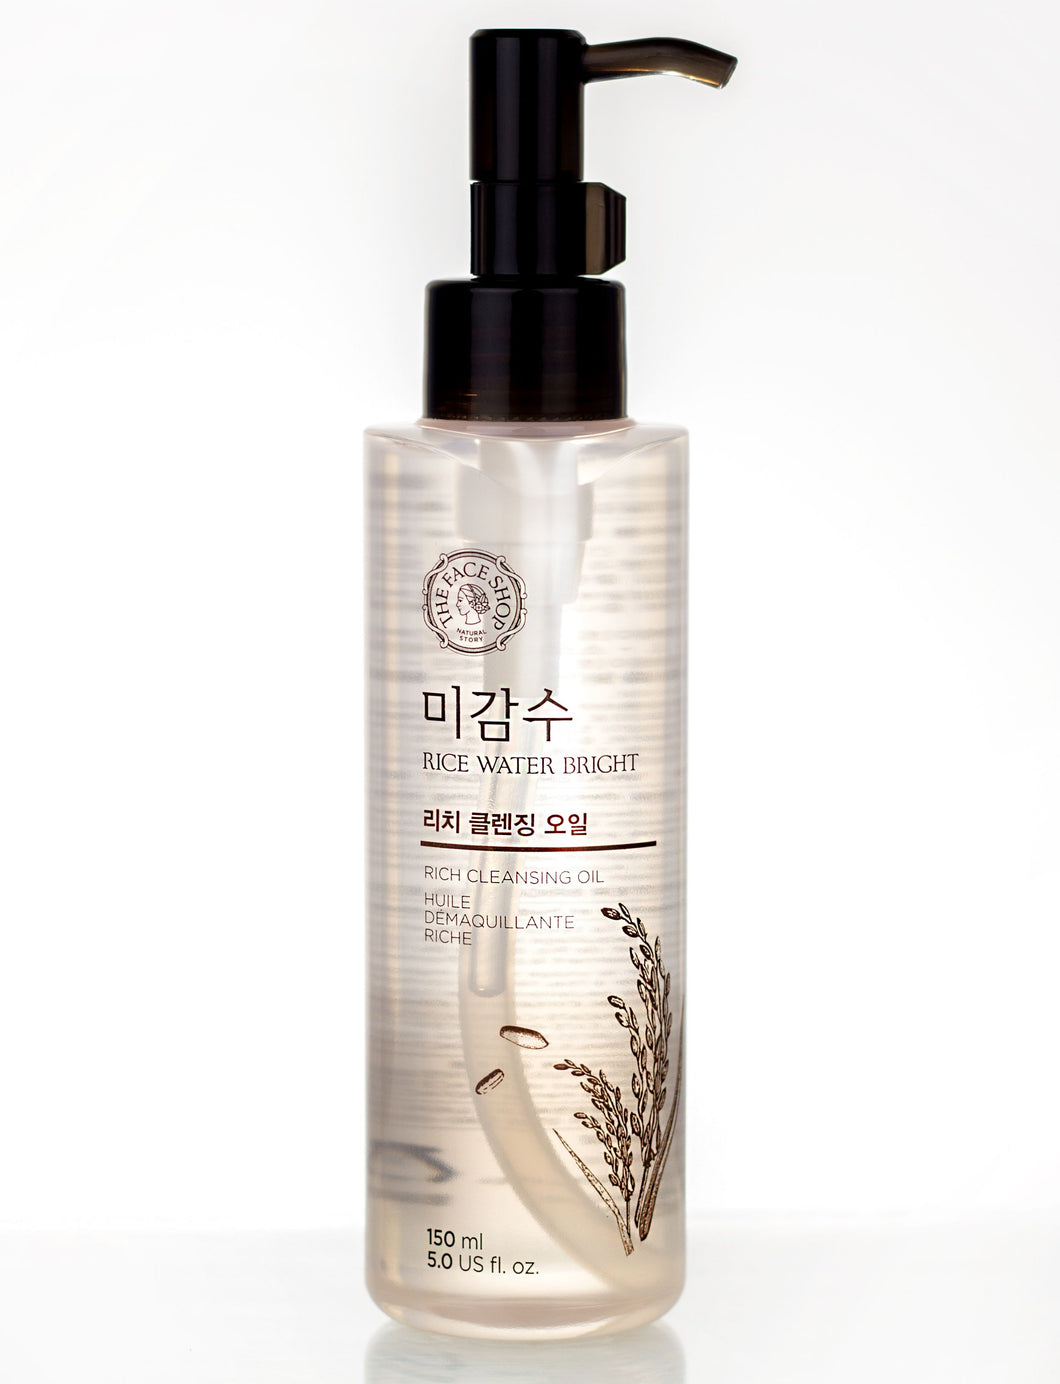 Rice Water Bright Rich Cleansing Oil 150ml - SevenBlossoms